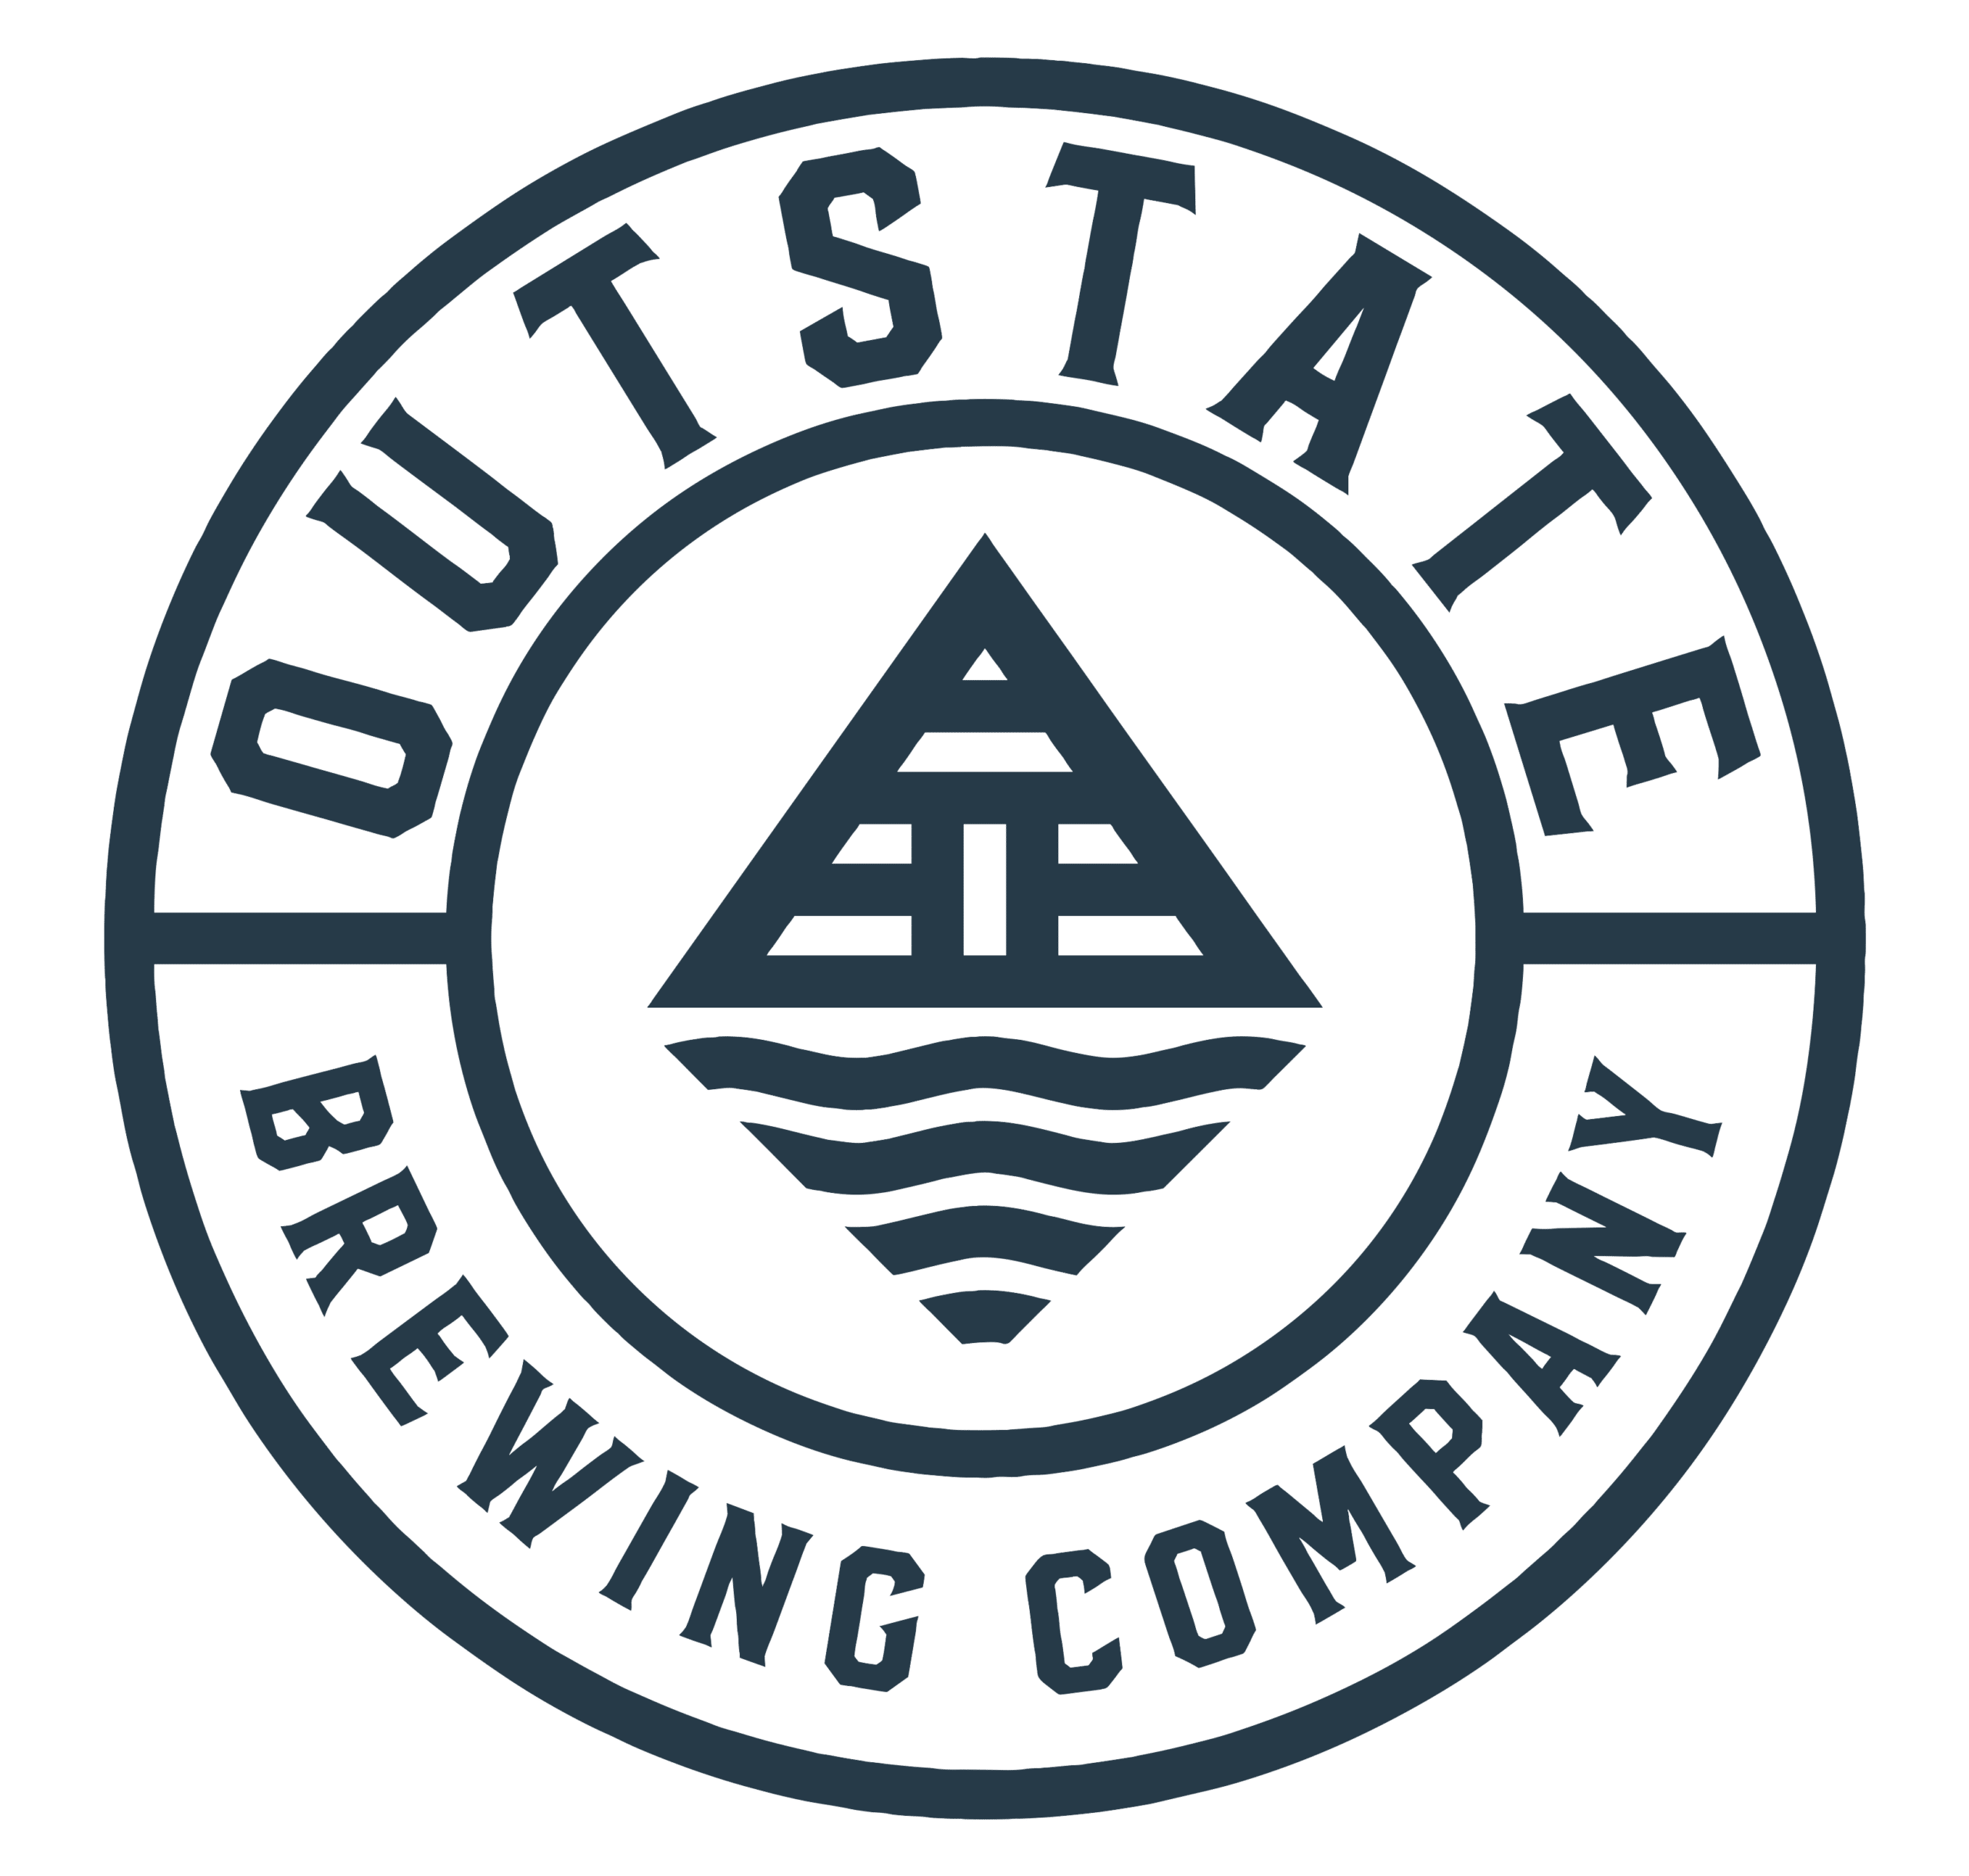 Outstate Brewing Company